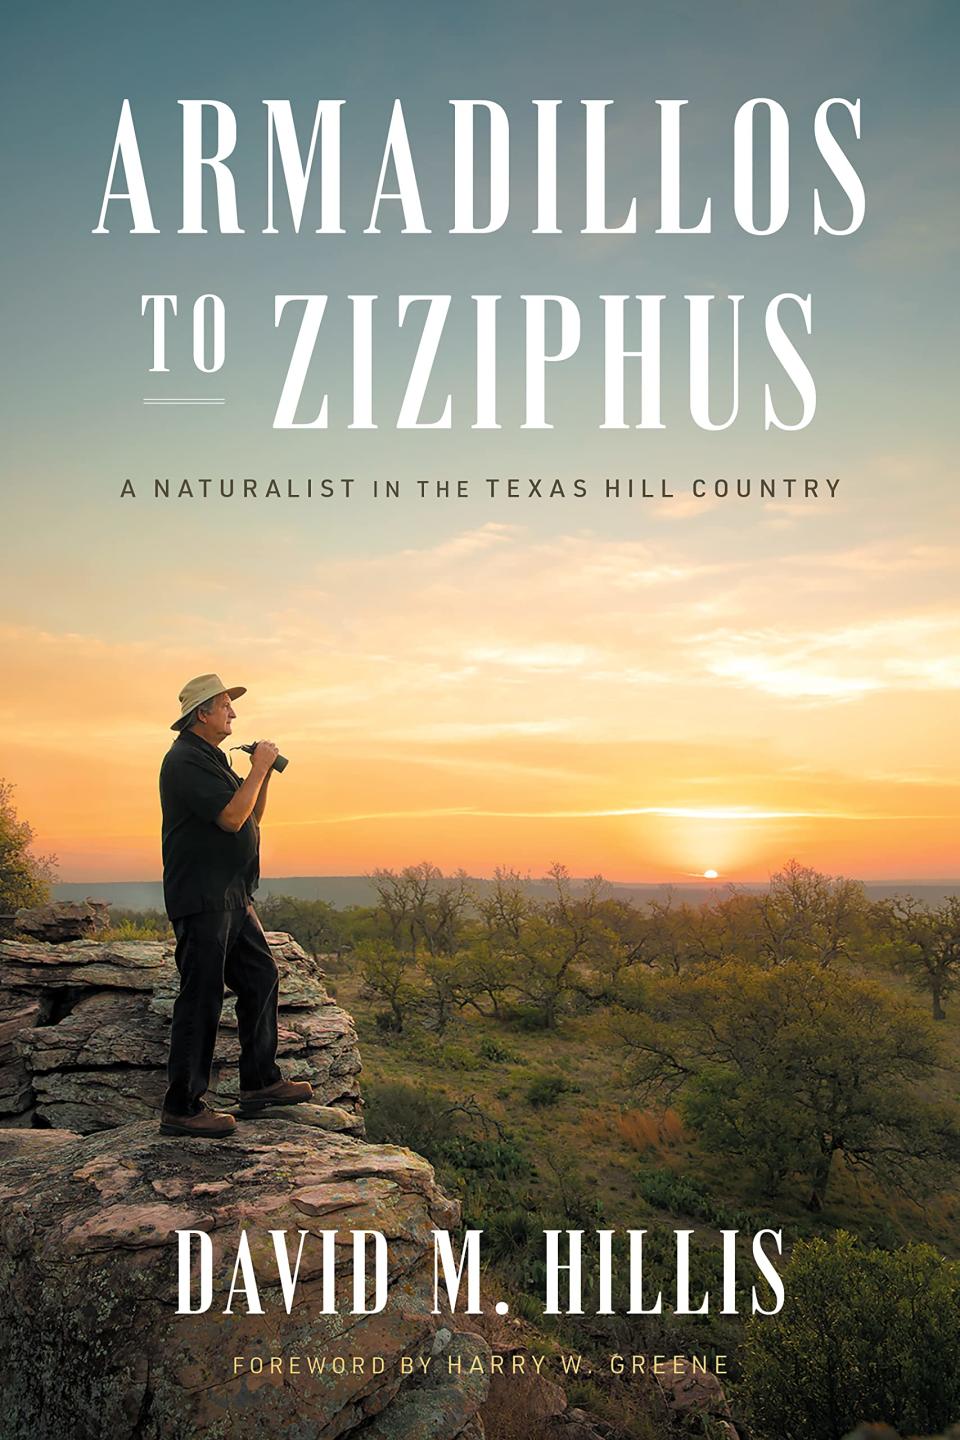 "Armadillos to Ziziphus: A Naturalist in the Texas Hill Country" by David M. Hillis (UT Press) is a delight at every turn.